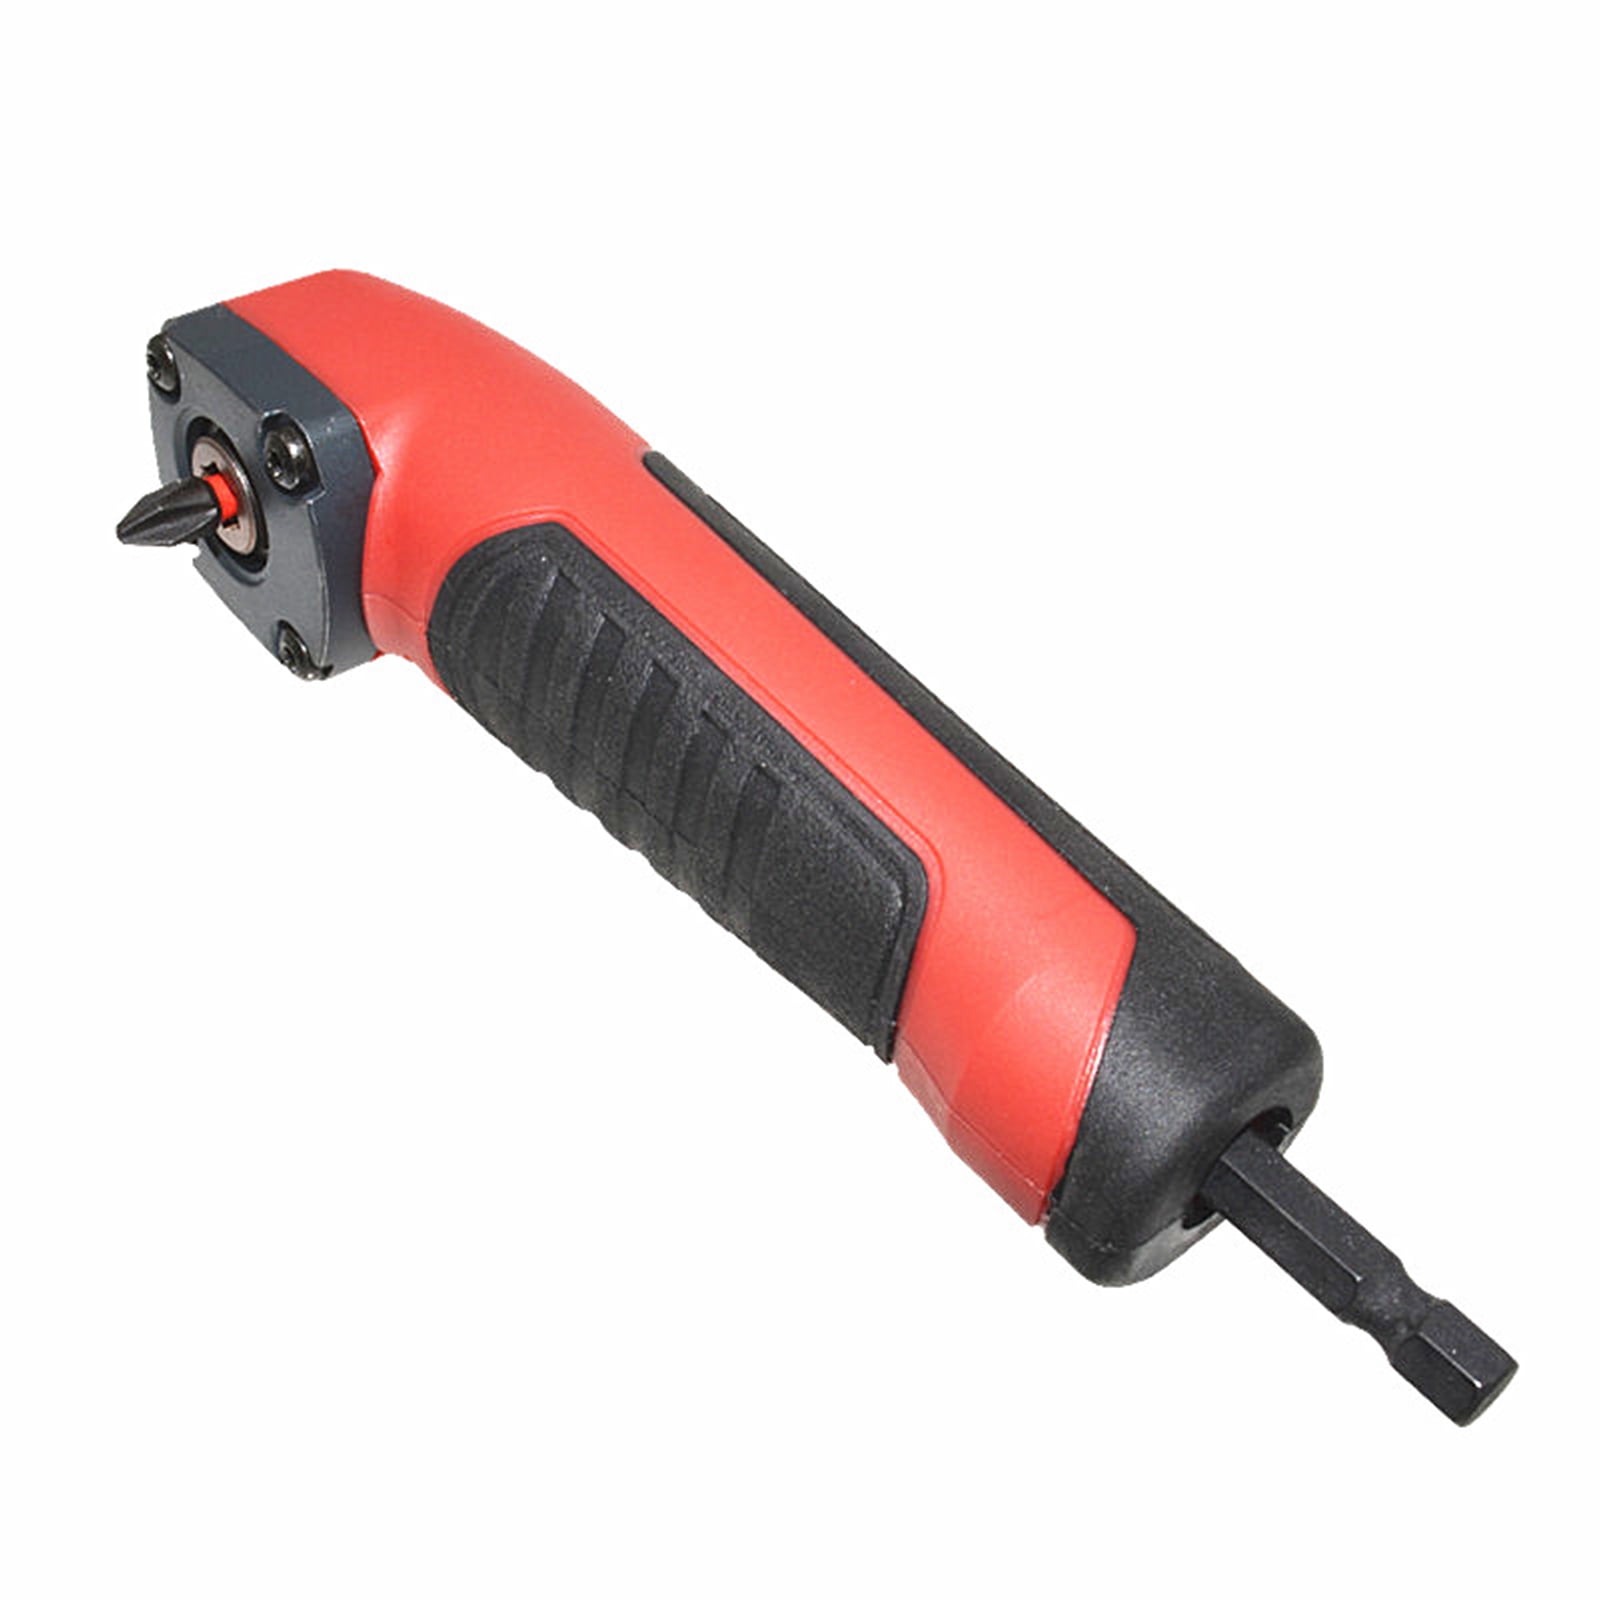 90 degree screwdriver  Compact 90 Degree Right Angled Ratchet Screwdriver  + Double Ended bit, fits into Restricted & confined Places. ENGINEER  dr-05,Red / Black